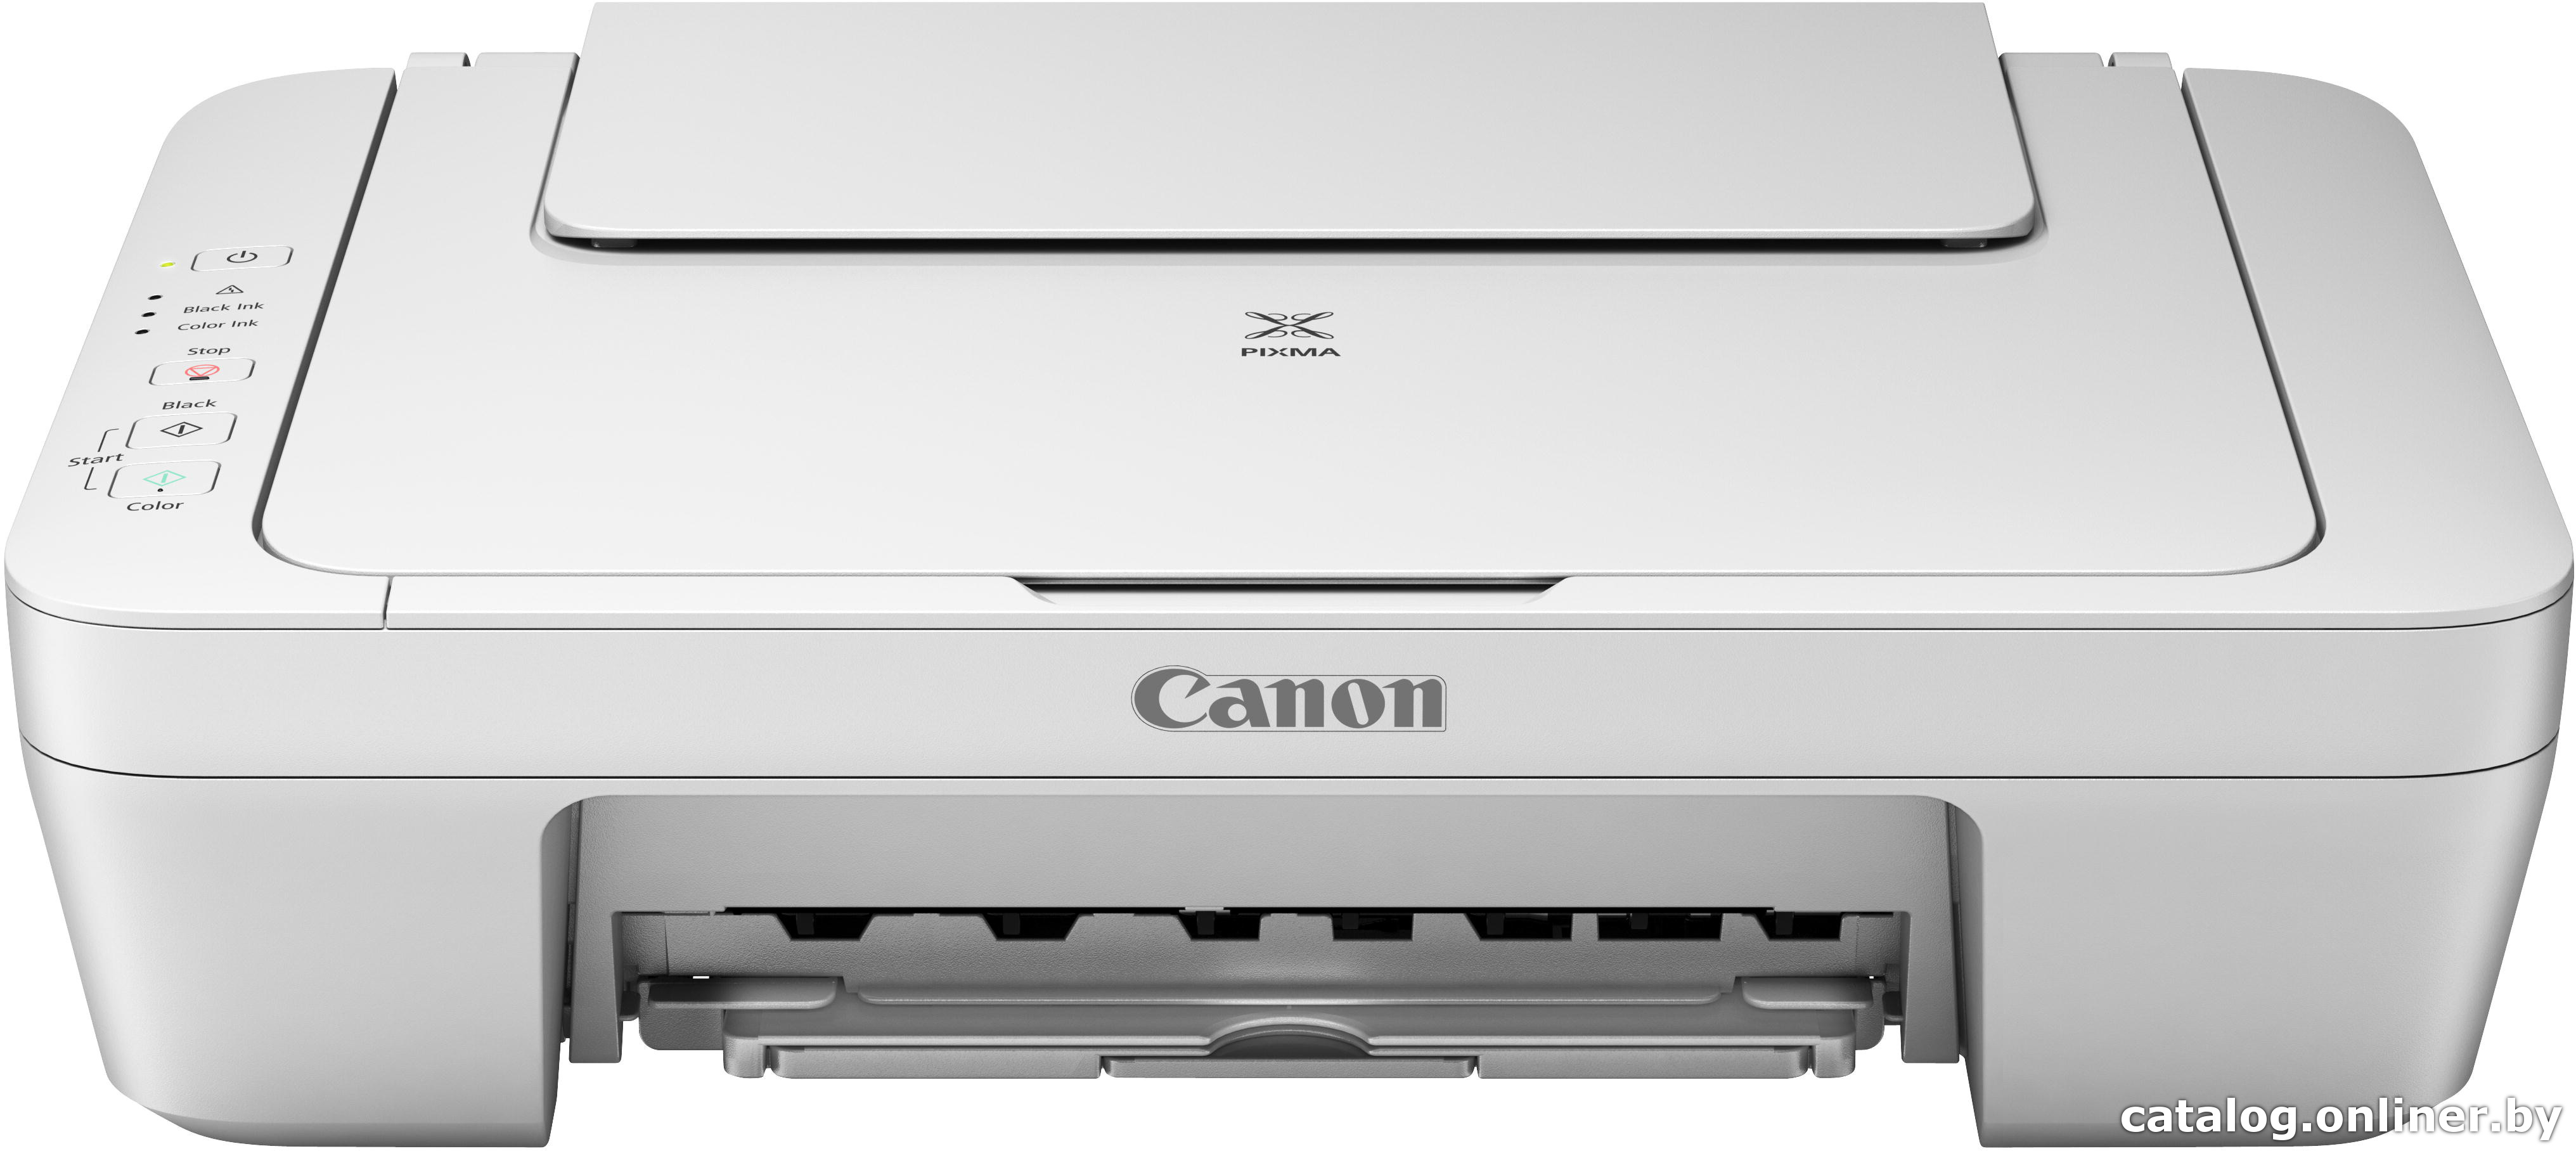 Canon MG2550S Driver Mac High Sierra How-to Download and Install - Featured